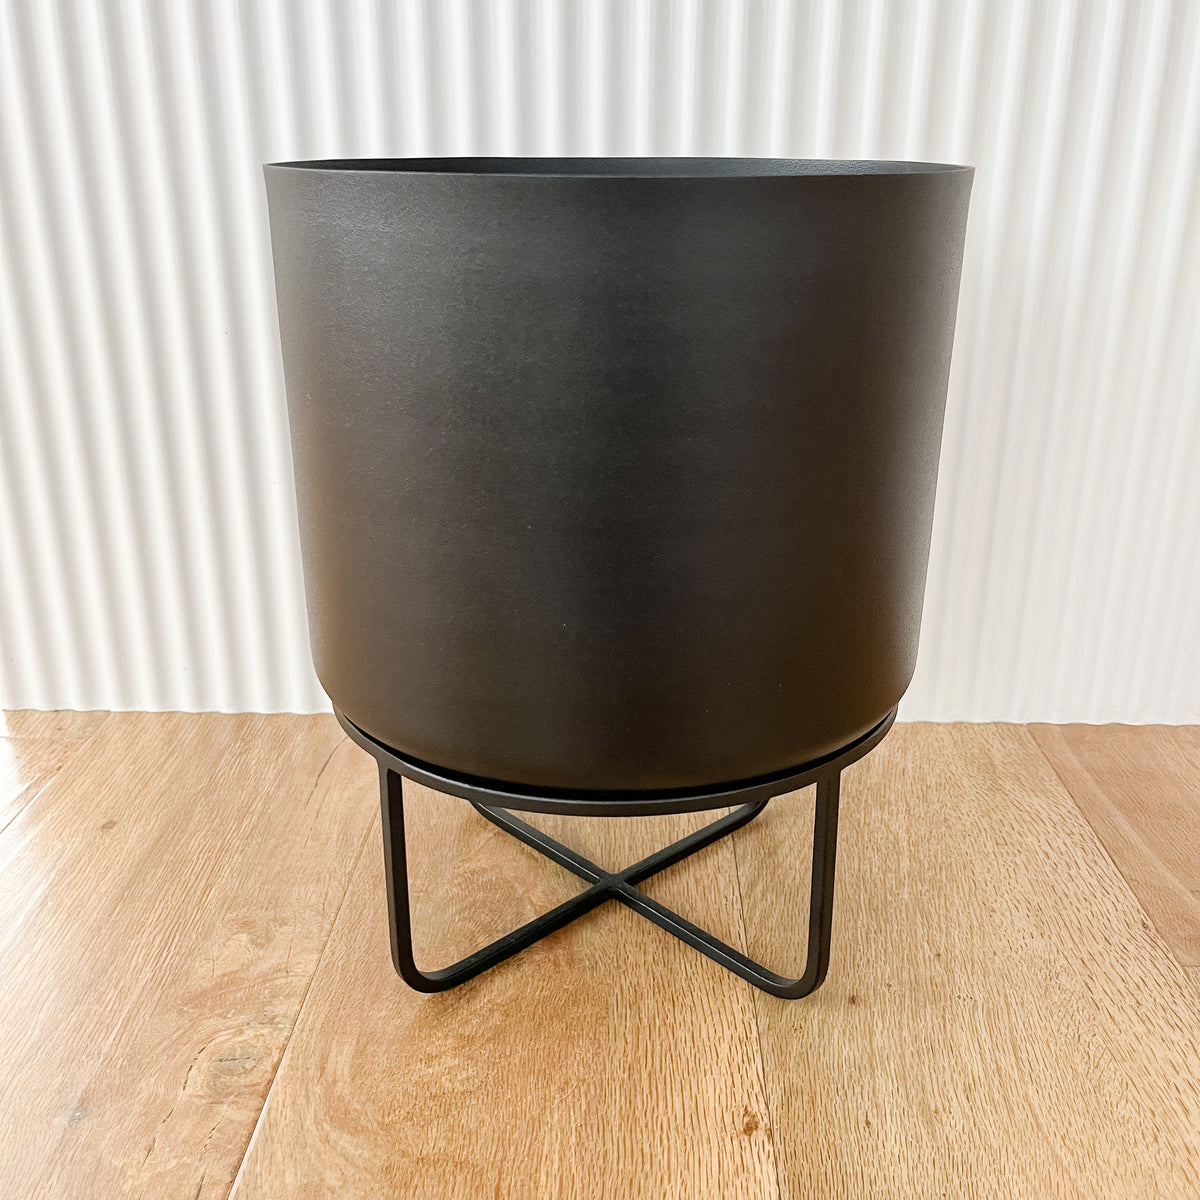 Asher Planter on Stand - Black